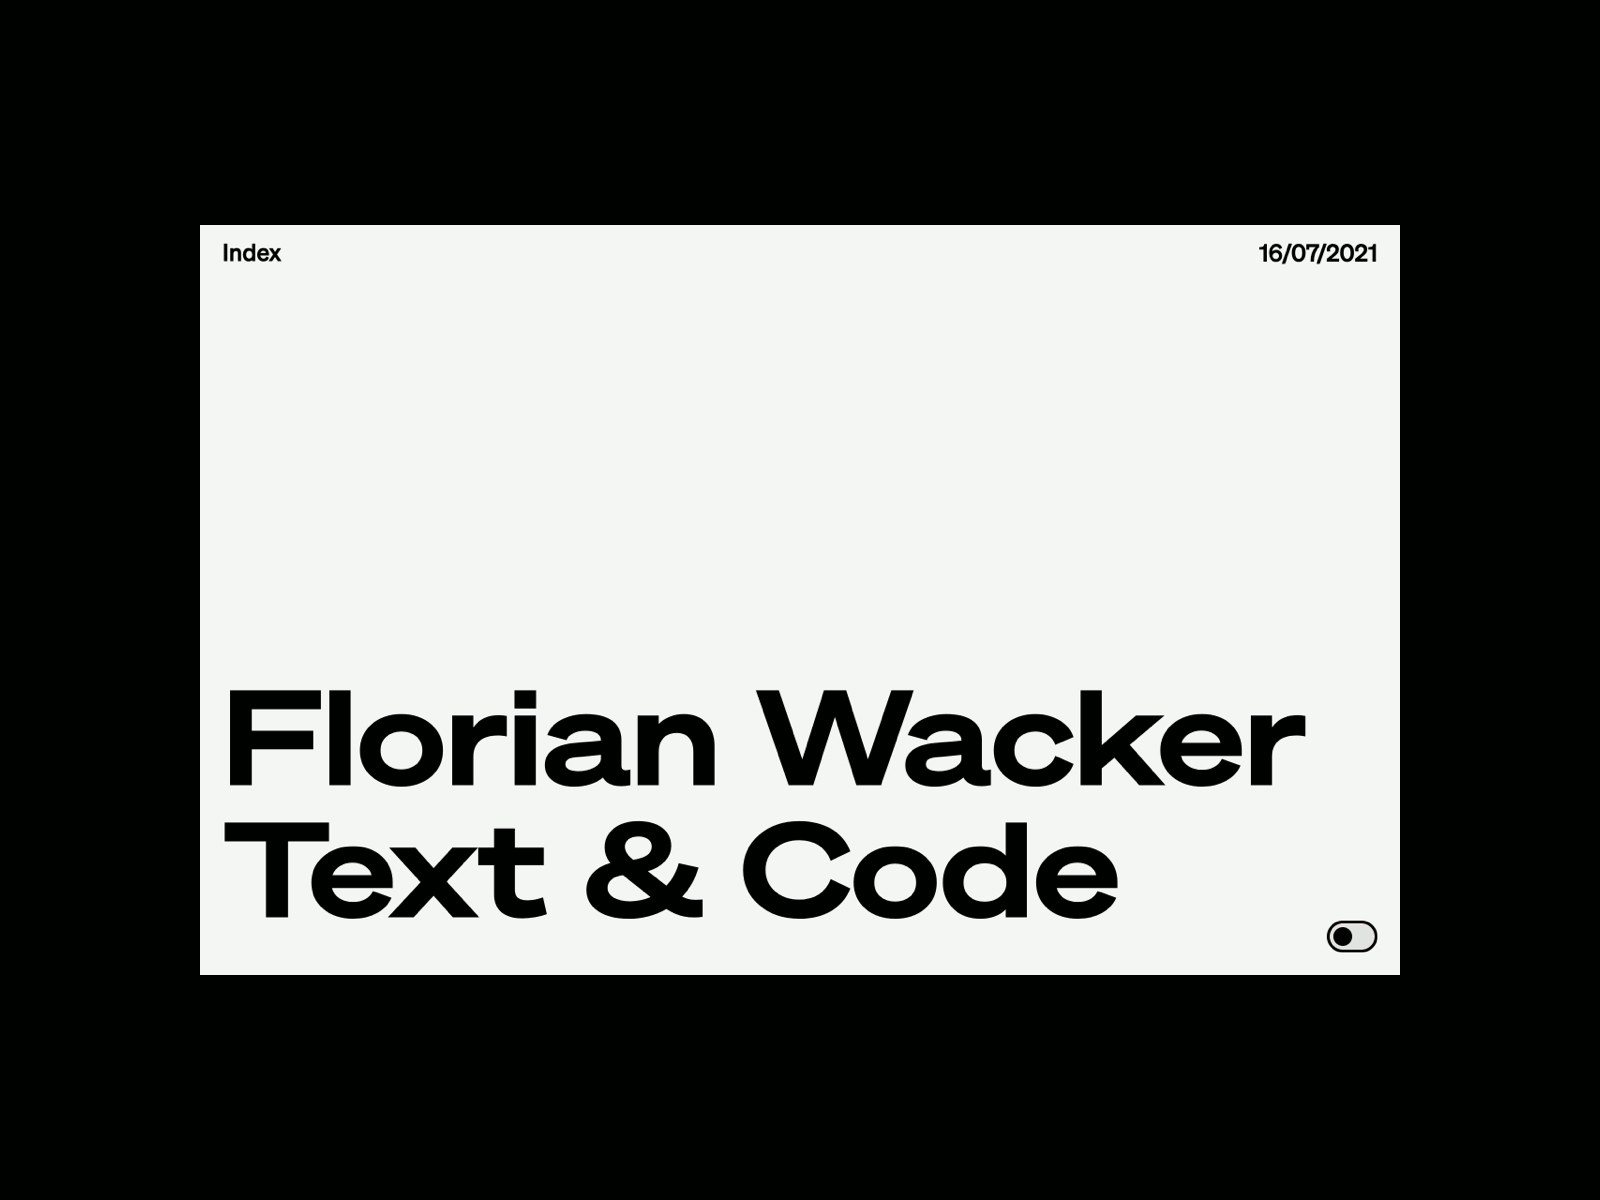 Text & Code